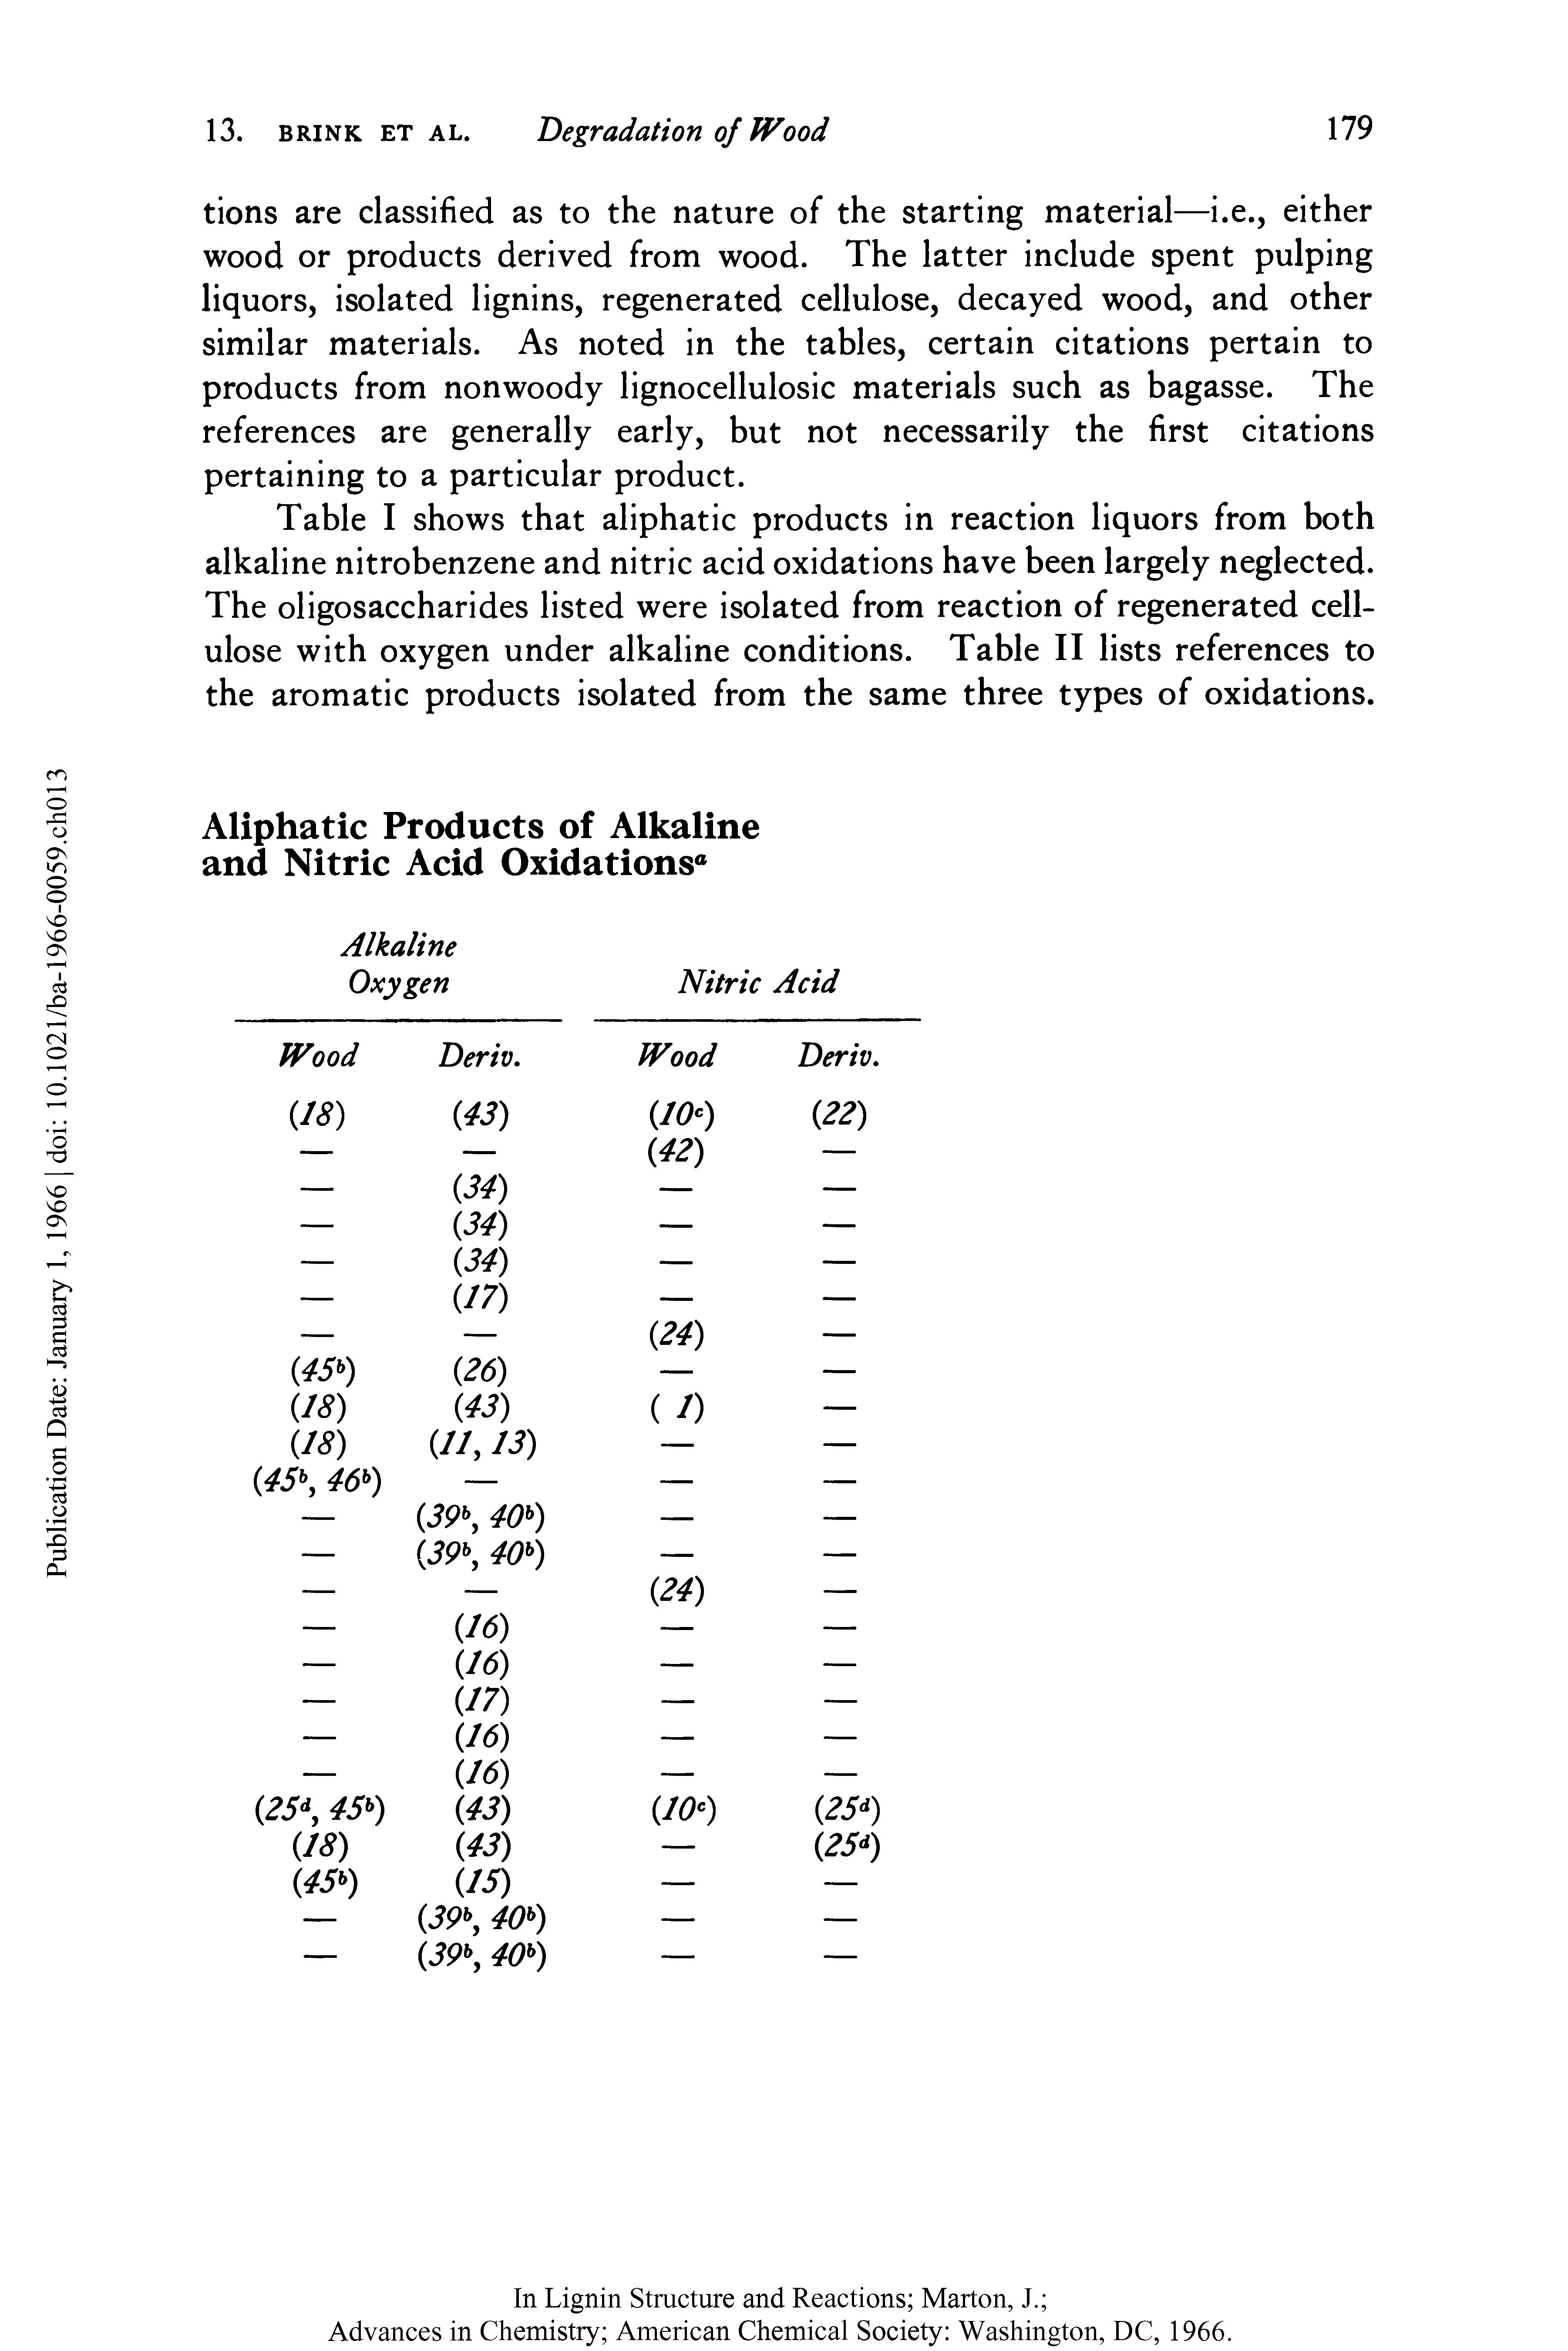 Table I shows that aliphatic products in reaction liquors from both alkaline nitrobenzene and nitric acid oxidations have been largely neglected. The oligosaccharides listed were isolated from reaction of regenerated cellulose with oxygen under alkaline conditions. Table II lists references to the aromatic products isolated from the same three types of oxidations.